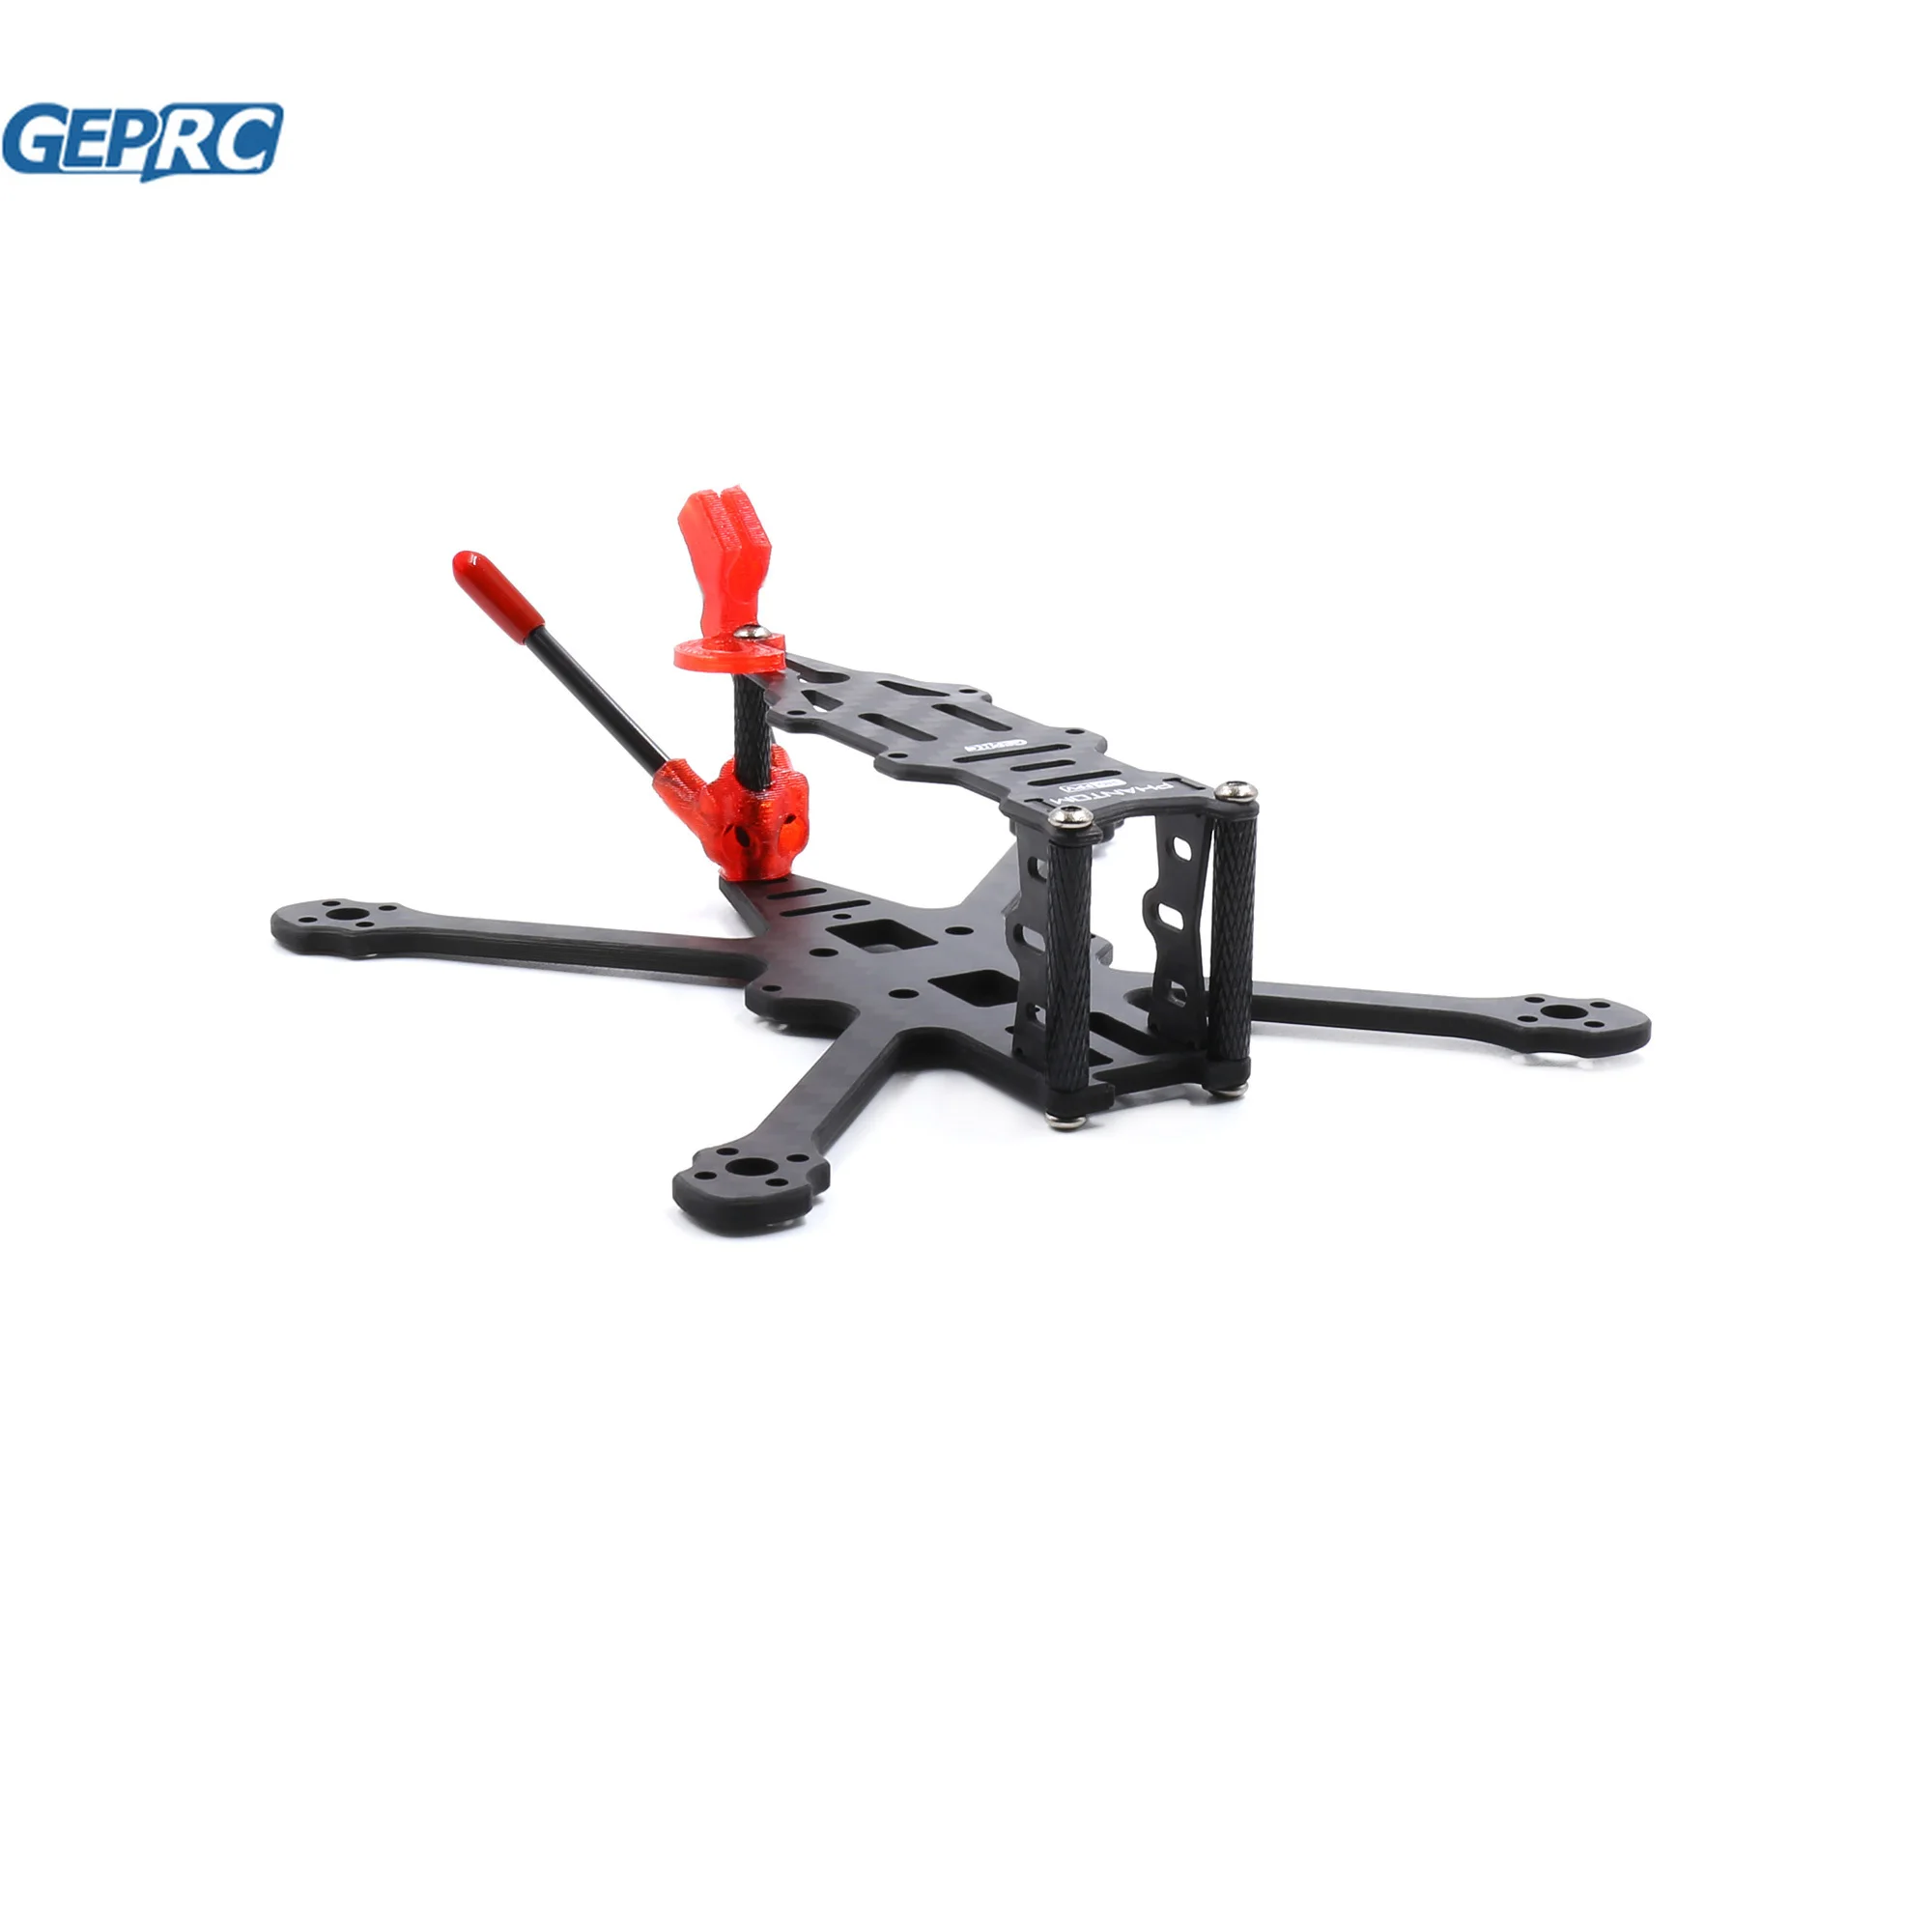 

GEPRC GEP-PTHD Frame Suitable For Phantom HD OR Smart HD Toothpick 35 Drone Carbon Fiber Frame For RC FPV Quadcopter Accessories